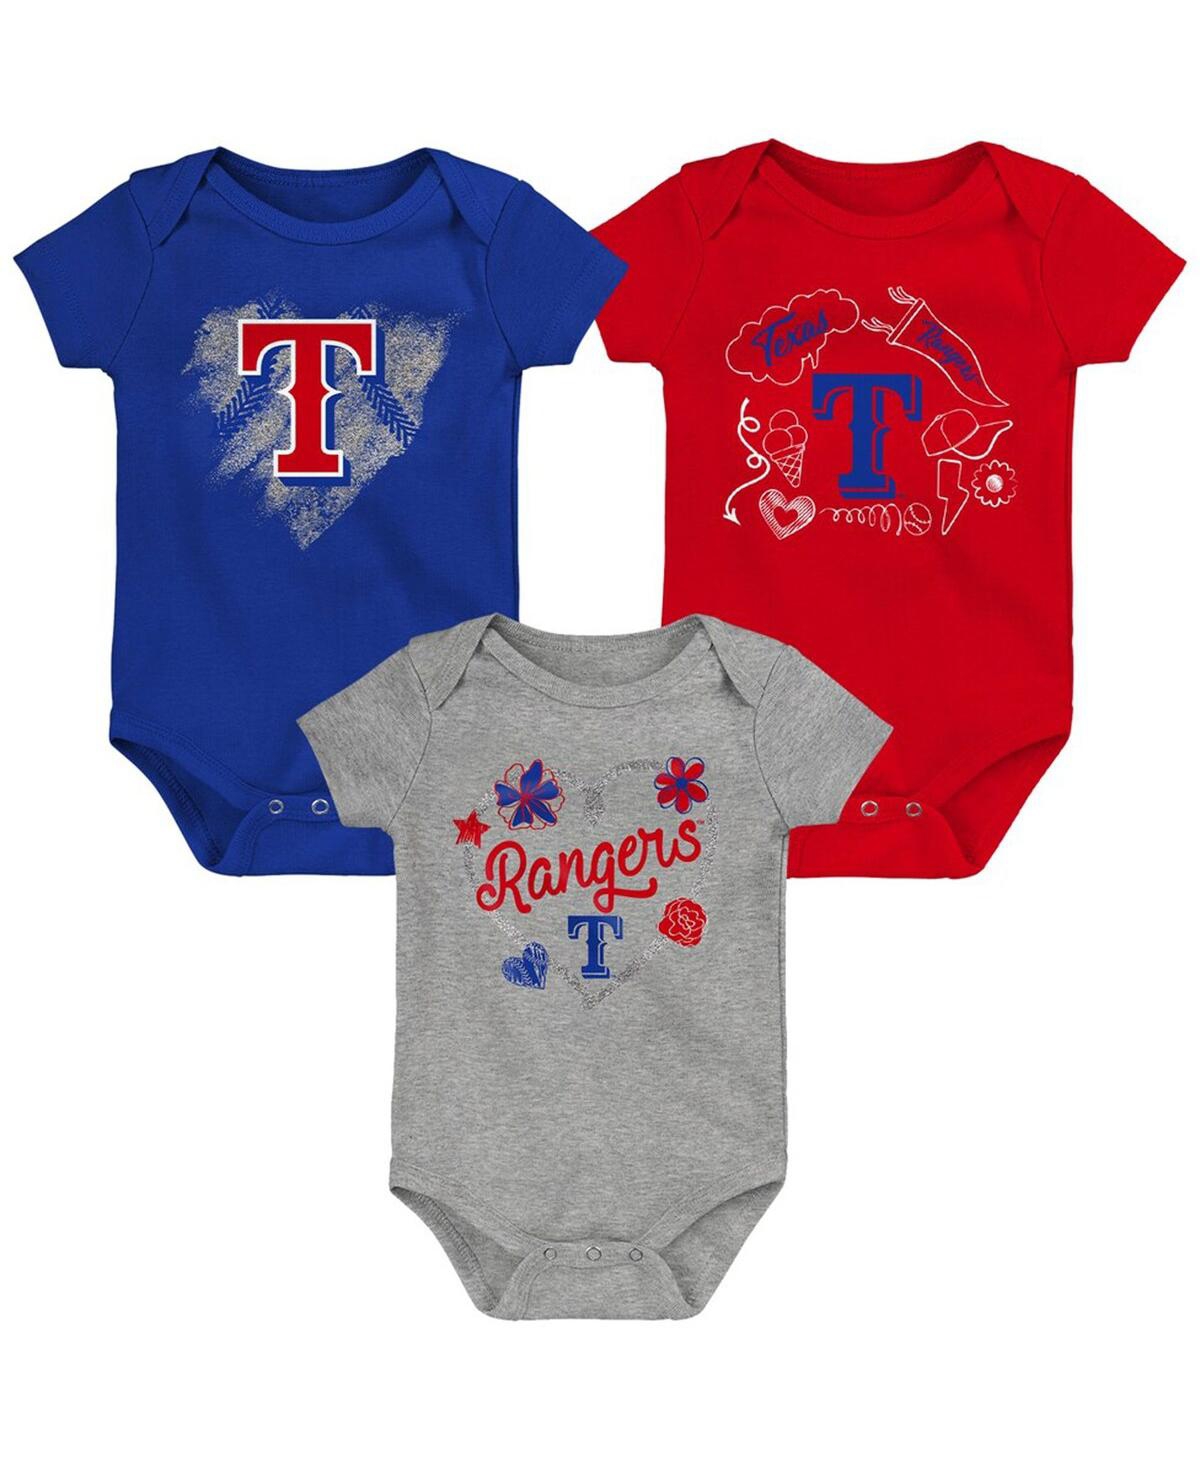 OUTERSTUFF INFANT BOYS AND GIRLS ROYAL, RED, GRAY TEXAS RANGERS BATTER UP 3-PACK BODYSUIT SET